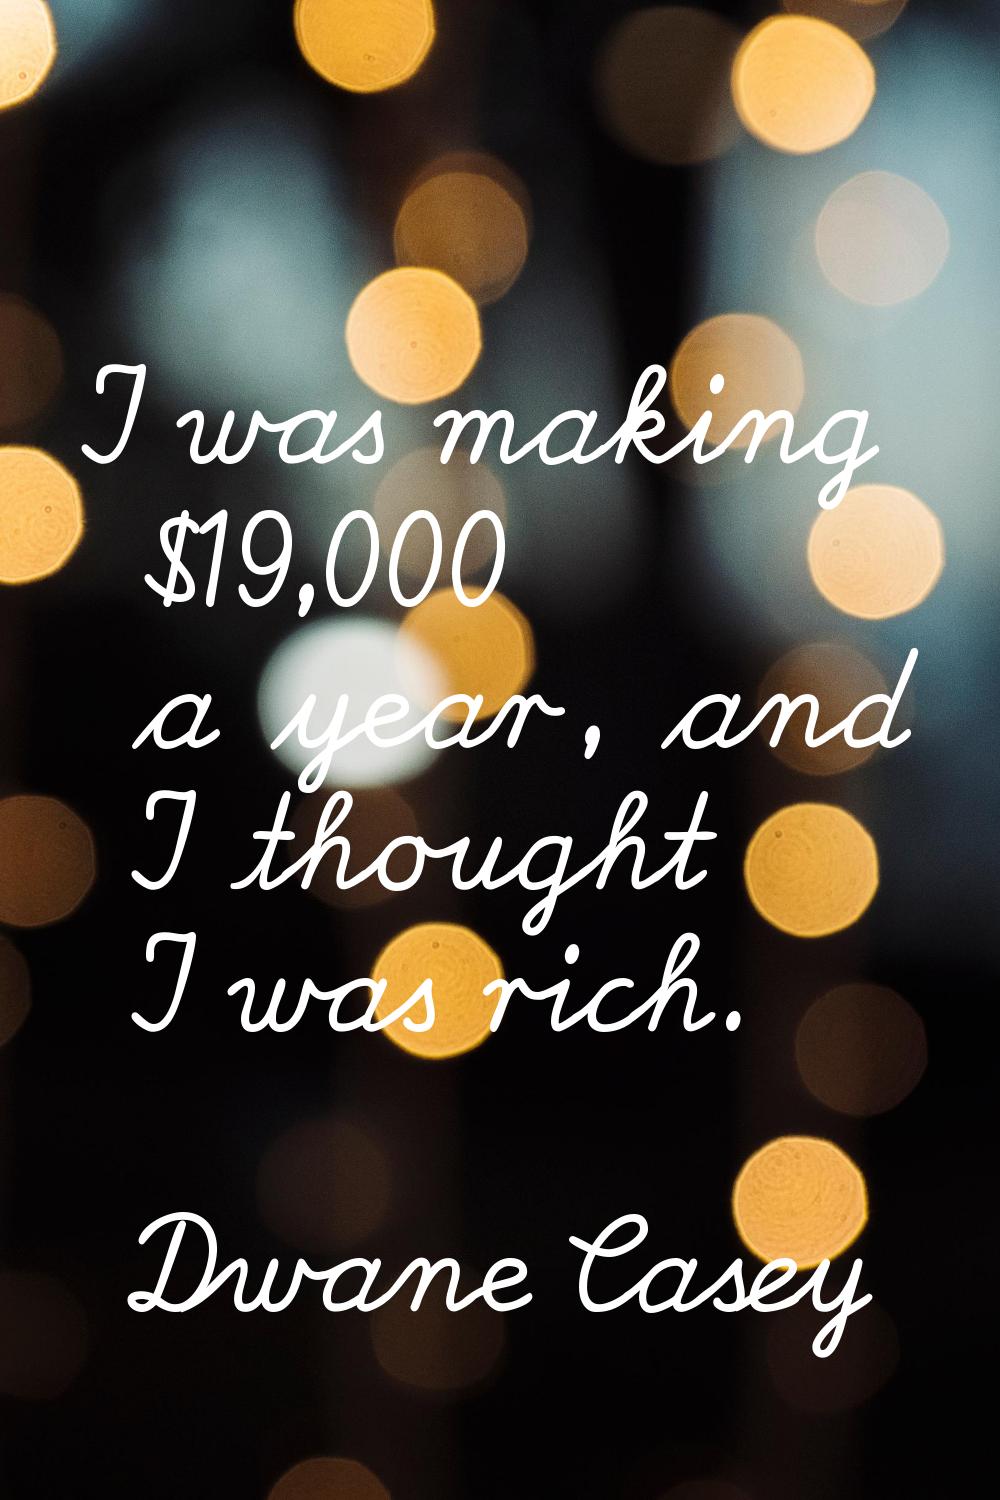 I was making $19,000 a year, and I thought I was rich.